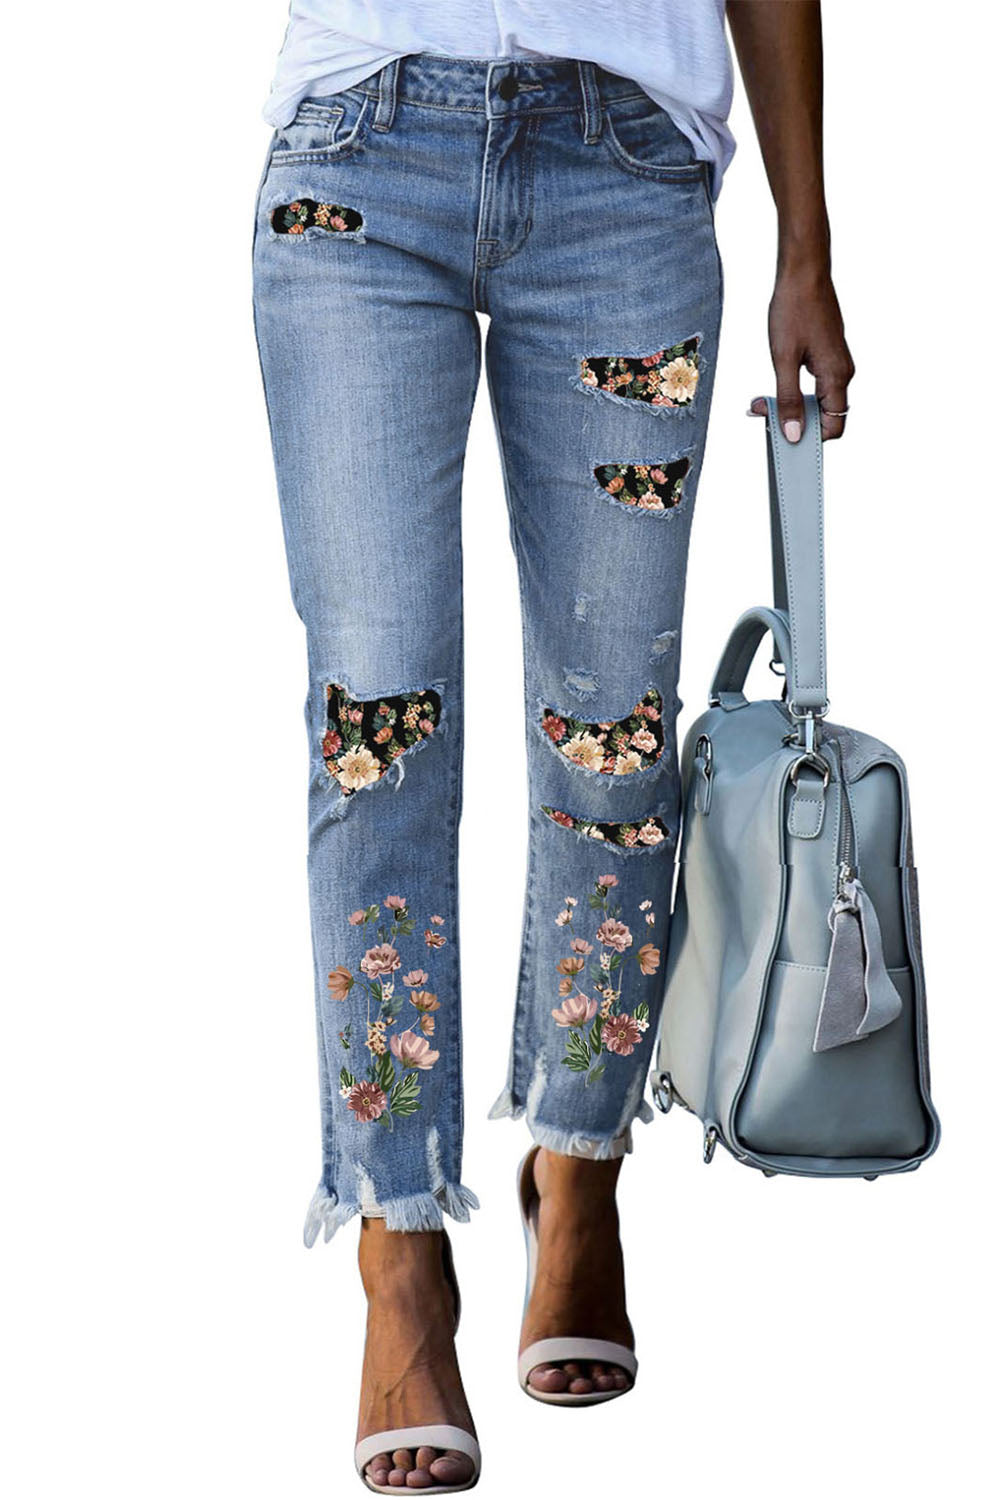 Sky Blue Printed Patch Ripped Skinny Jeans Jeans JT's Designer Fashion